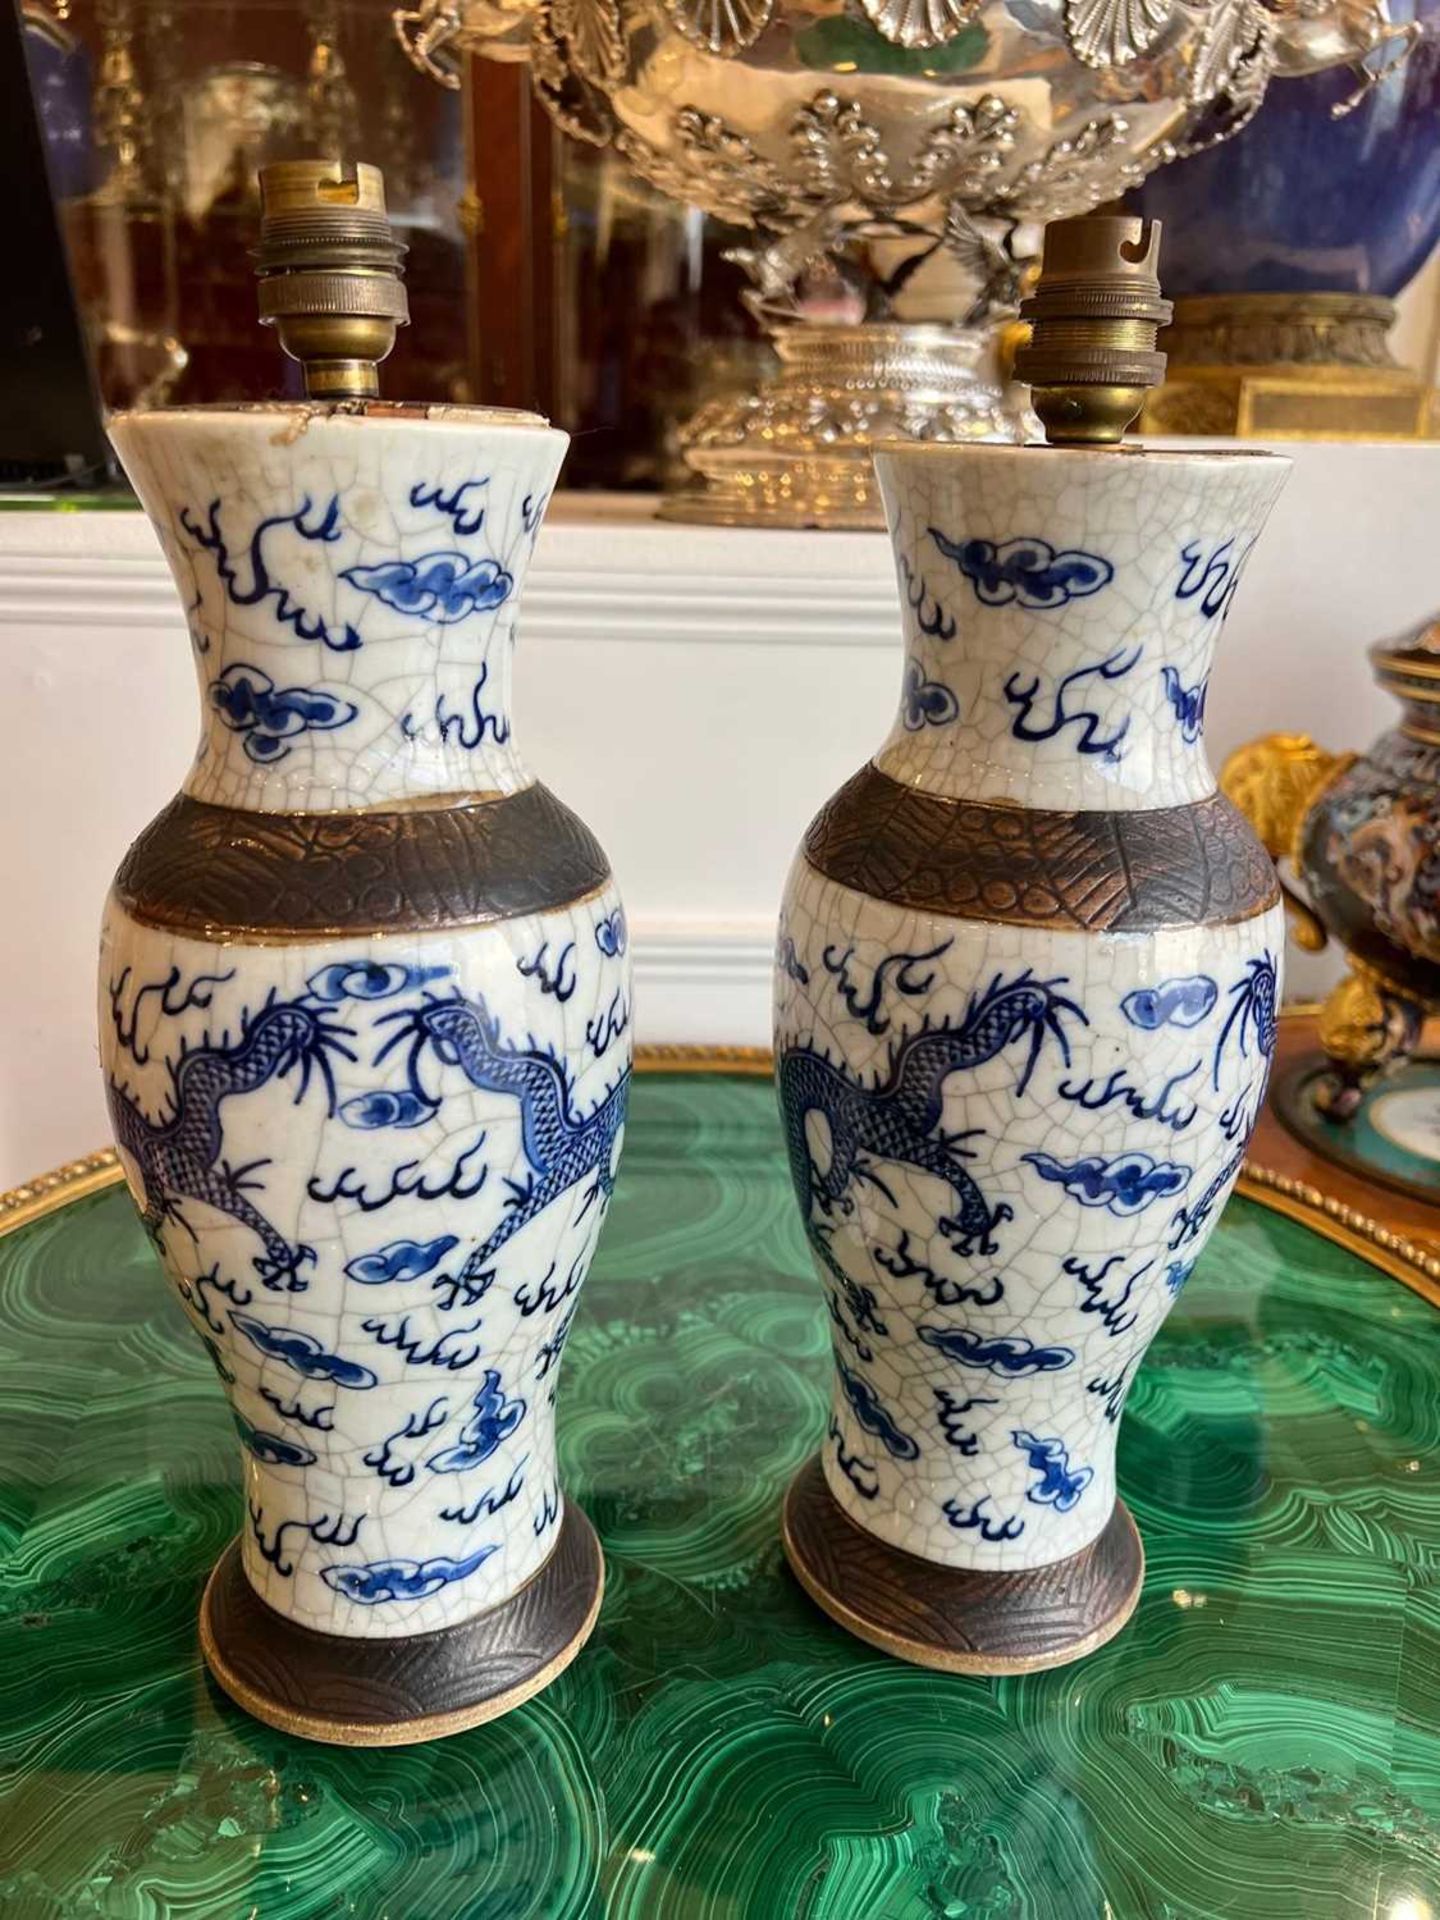 A PAIR OF 19TH CENTURY CHINESE BLUE AND WHITE CRACKLE GLAZE VASE LAMPS - Image 8 of 9